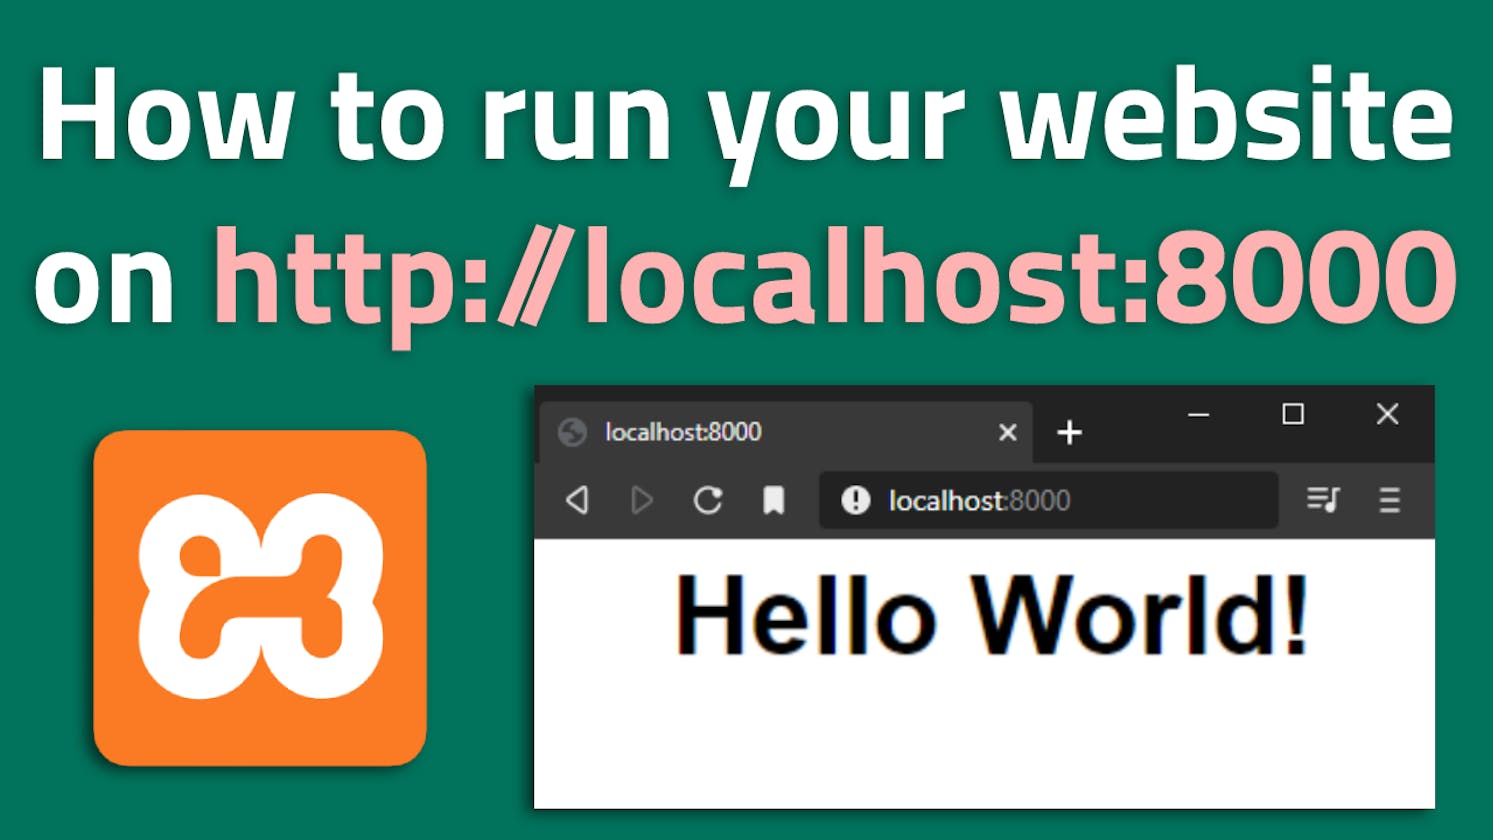 How do I launch a website on localhost?